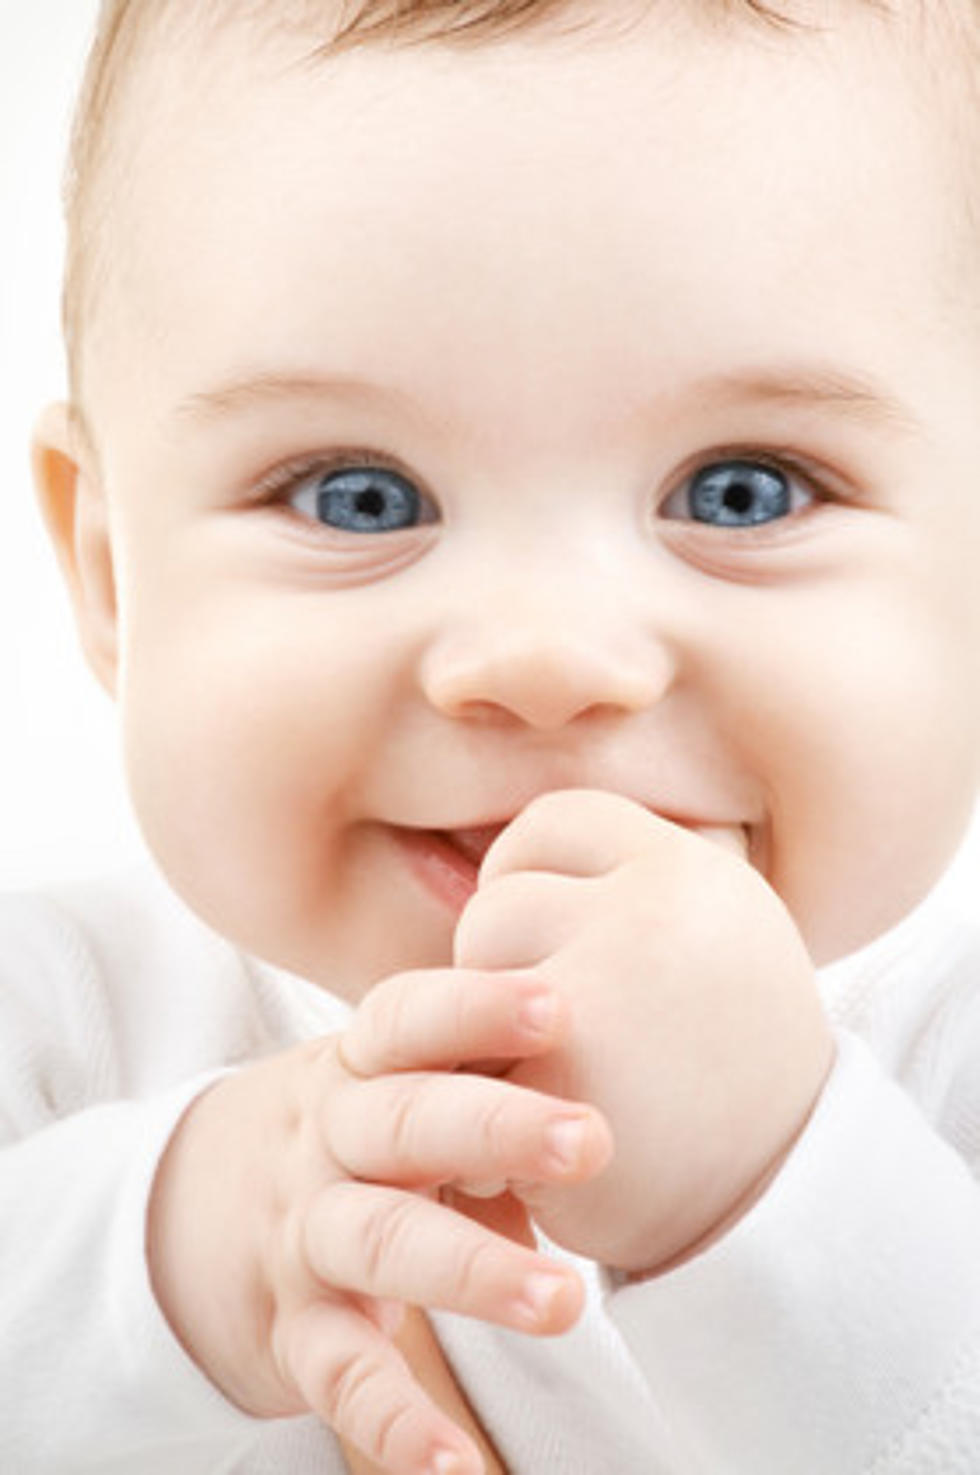 And the Most Popular Baby Boy Names in New York Are…